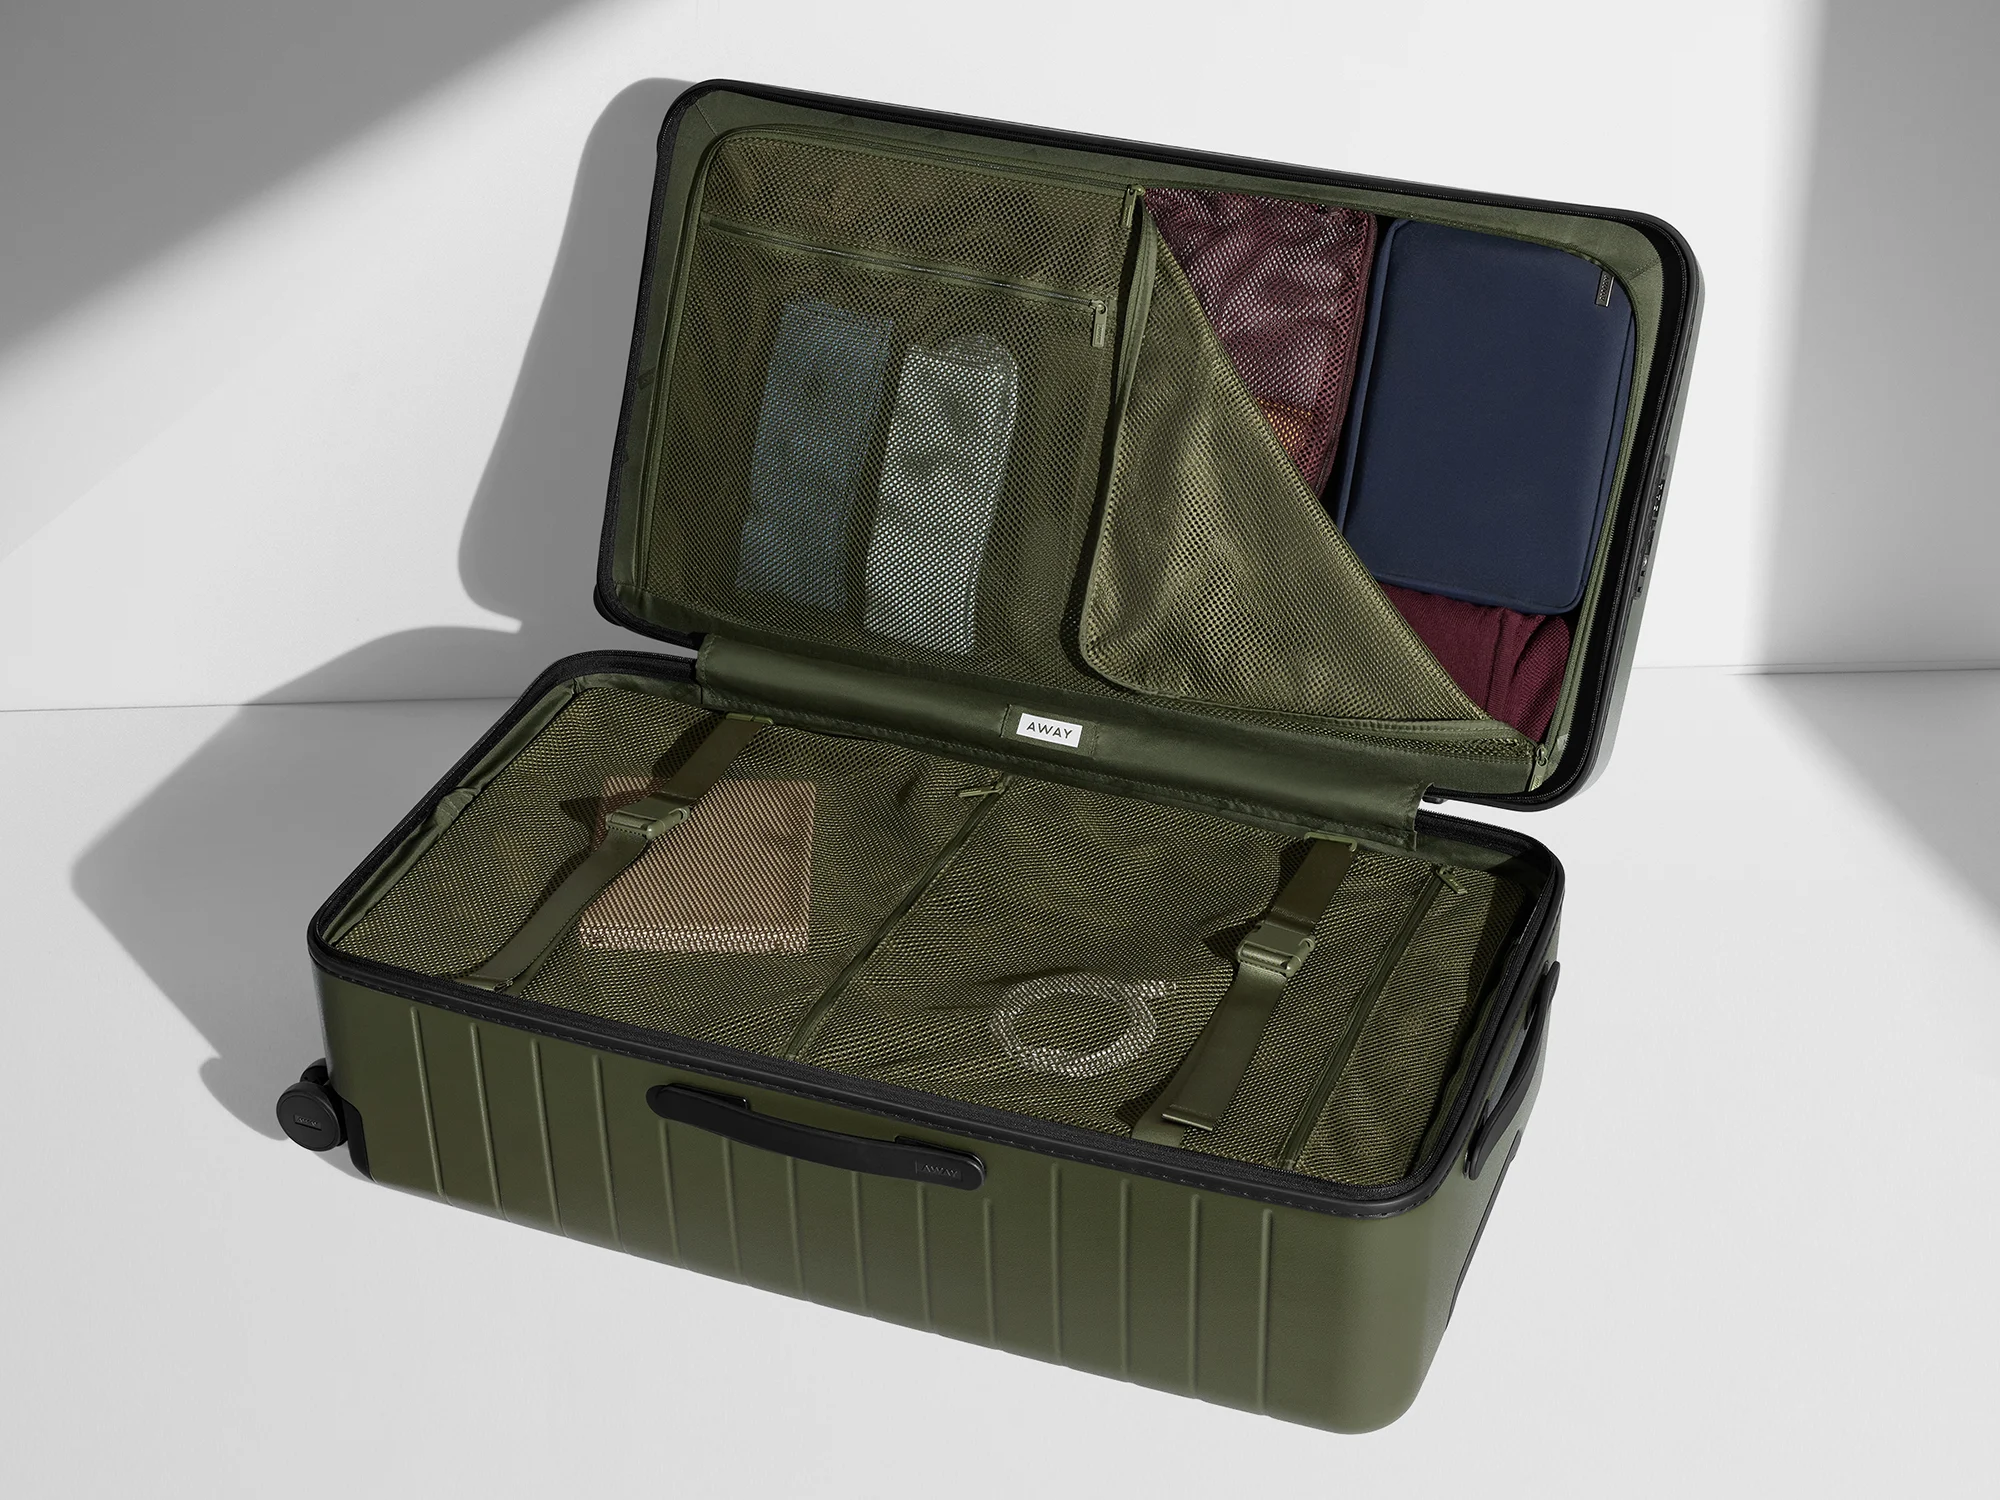 Open, packed view of the Away Trunk suitcase with travel and packing organizers